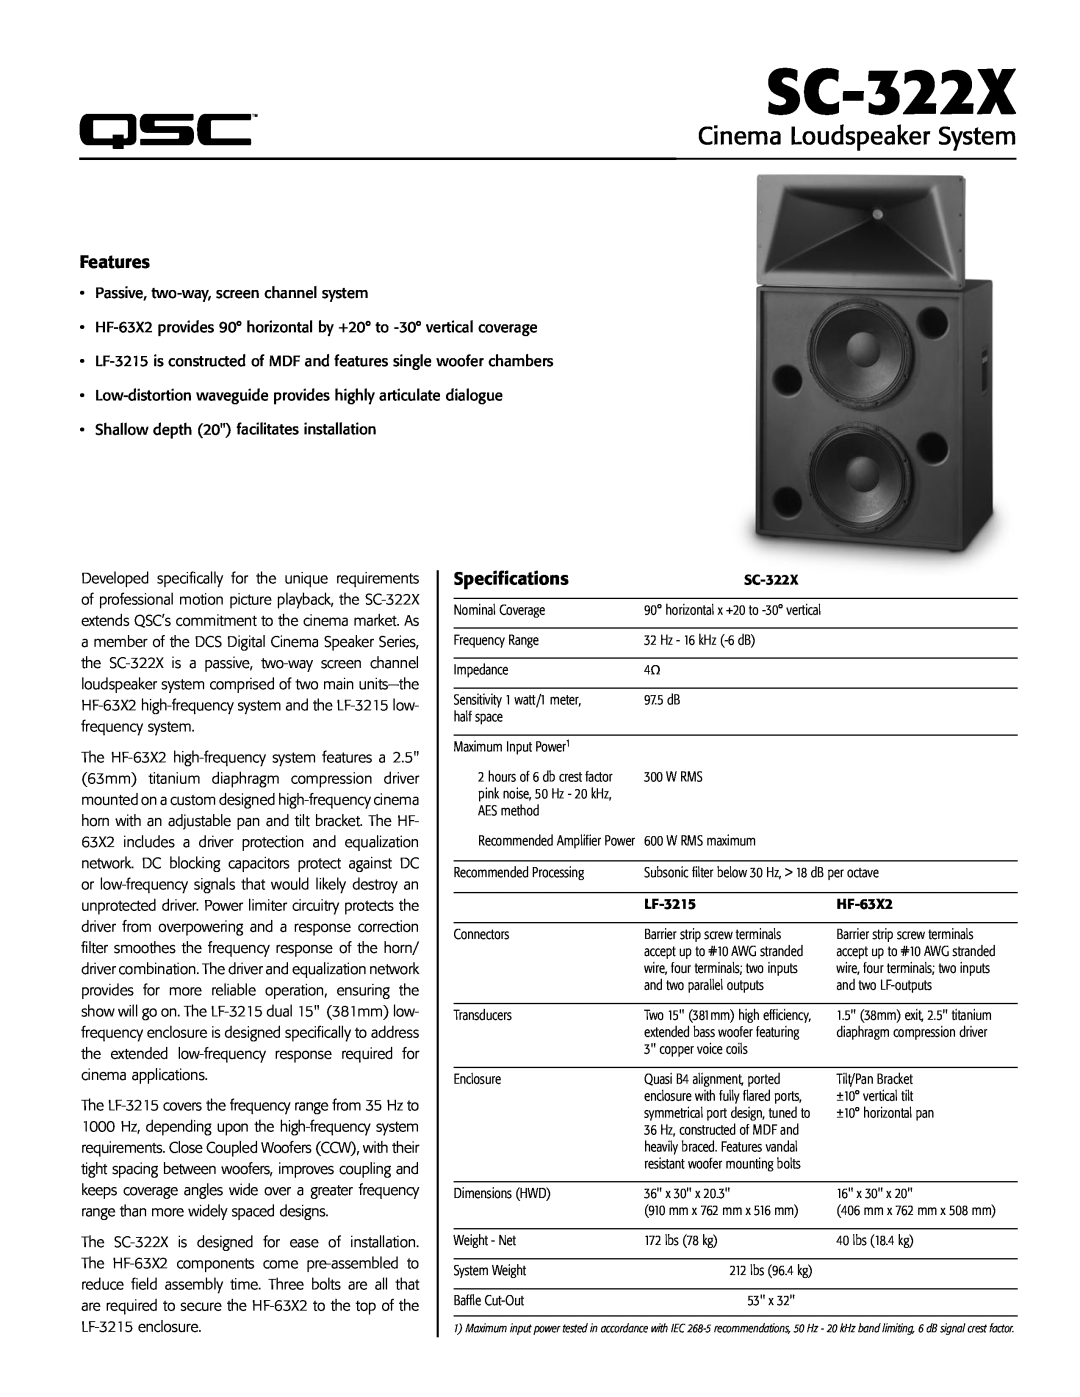 QSC Audio SC-322X specifications Cinema Loudspeaker System, Passive, two-way,screen channel system 